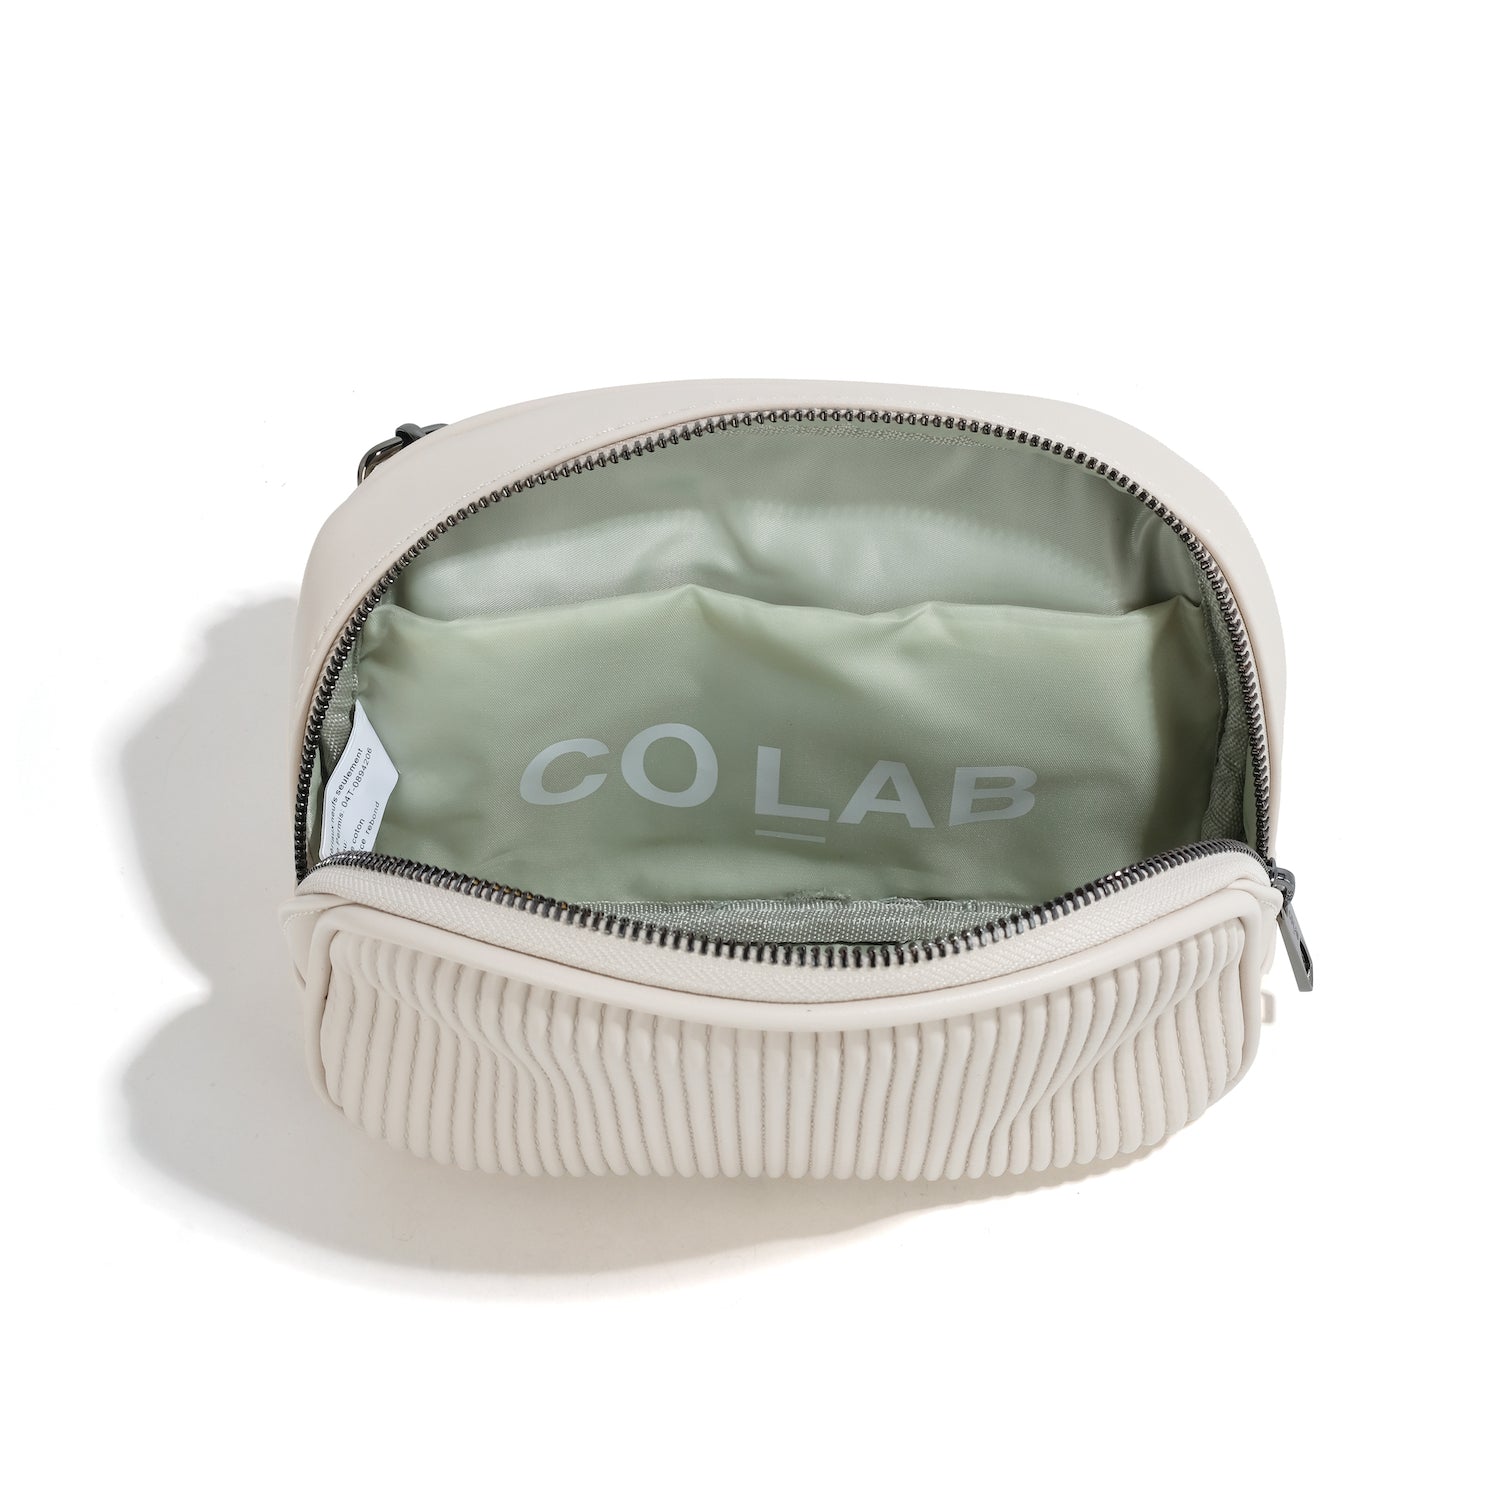 co-lab Neoma Belt Bag - Vanilla Accessories - Other Accessories - Handbags & Wallets by co-lab | Grace the Boutique